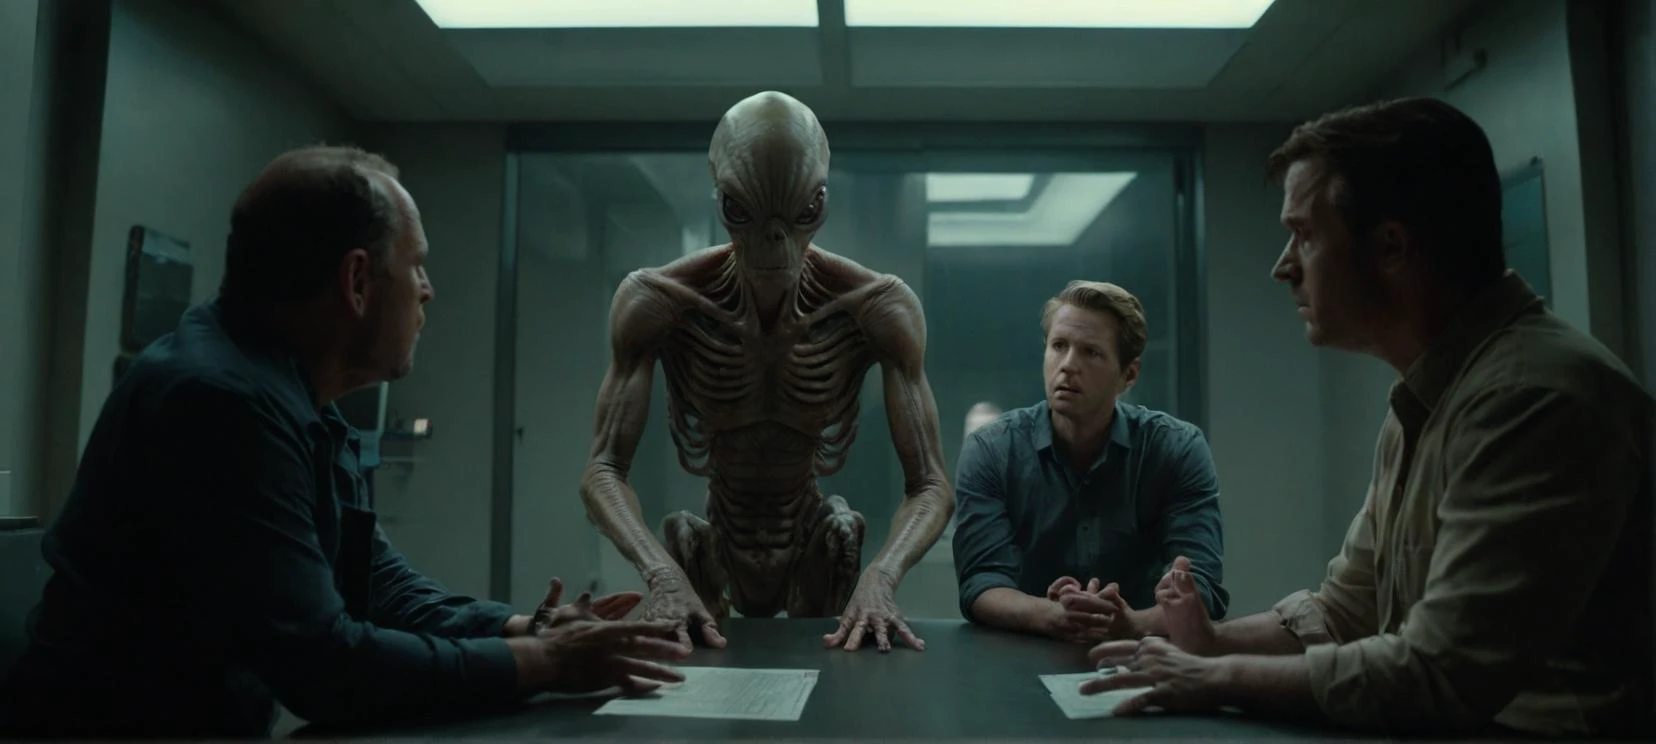 A cinematic film still of a 

syberart Create a tense and dramatic screenshot of a group of people being interrogated by an alien species, set in the year 2980. Use advanced lighting techniques to capture the mood and atmosphere of the scene, and incorporate elements of the interrogation room, such as harsh lighting and sterile surroundings, to add tension and fear. Utilize a 35mm camera and anamorphic lens to give the image a classic and cinematic feel, and use post-processing software like Lightroom to sharpen and enhance the details of the image. Use a professional camera brand like ARRI, Canon, Fuji, or Kodak to ensure impeccable image quality and realism.

